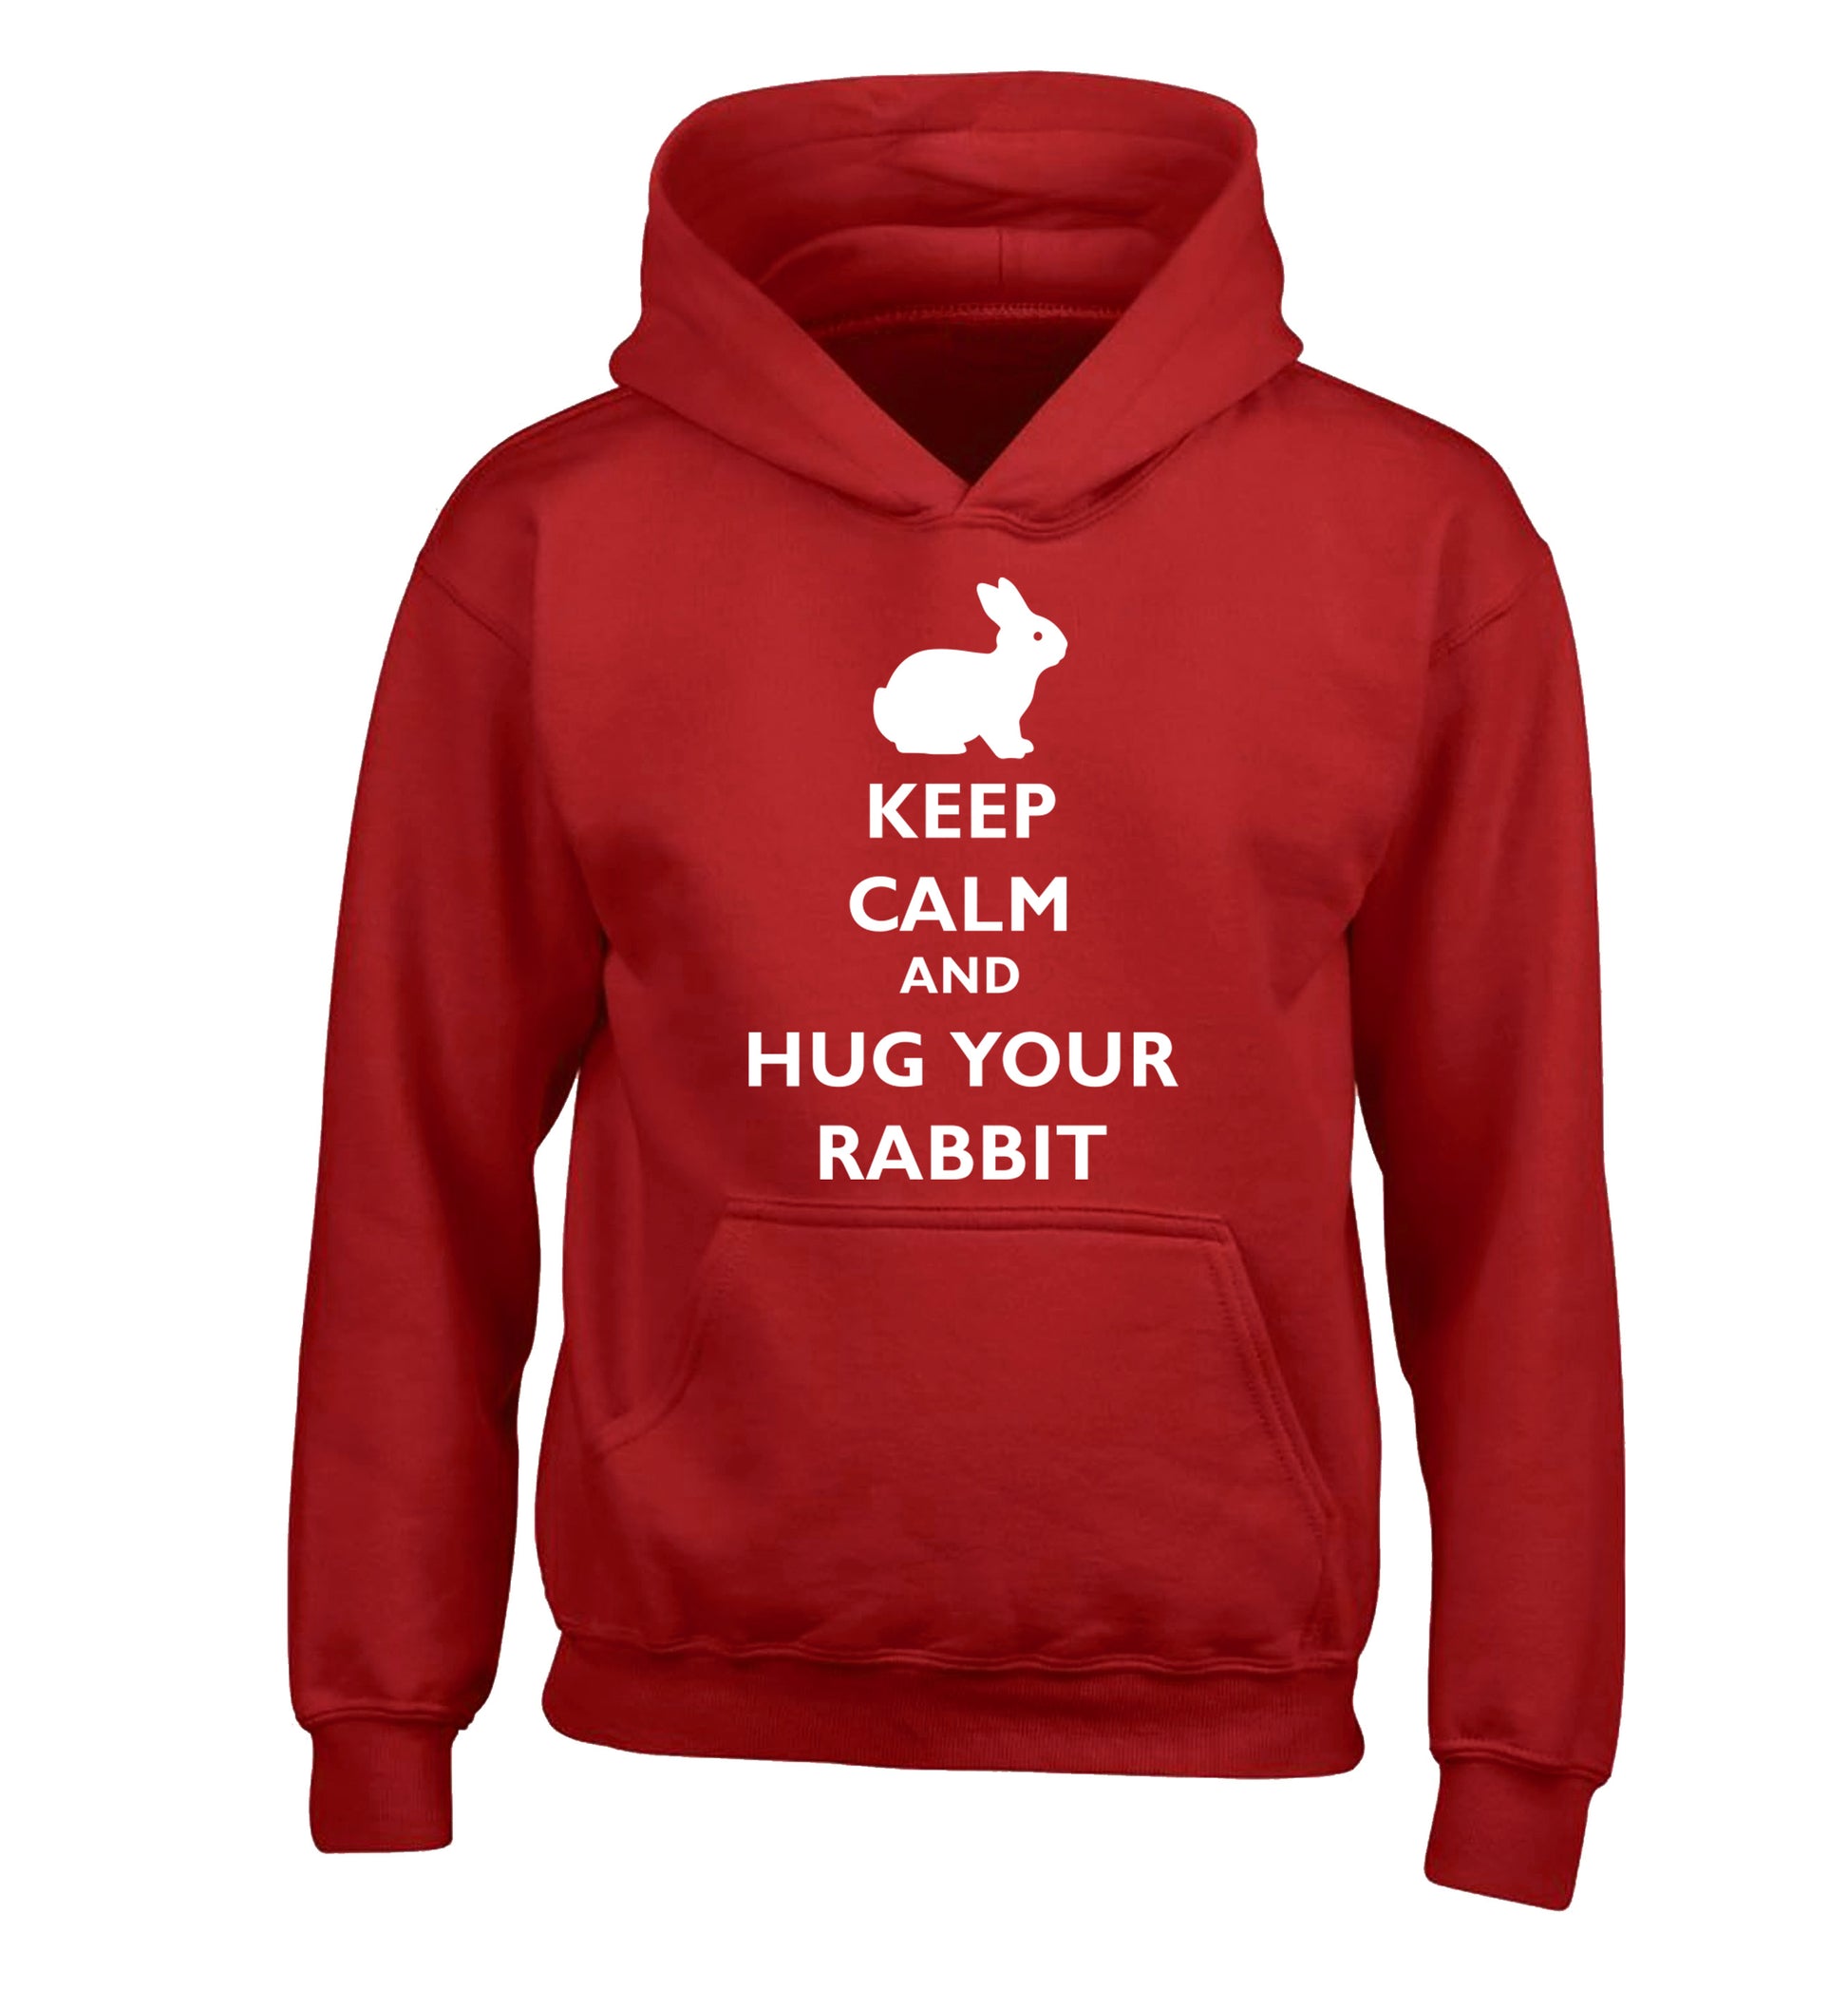 Keep calm and hug your rabbit children's red hoodie 12-13 Years